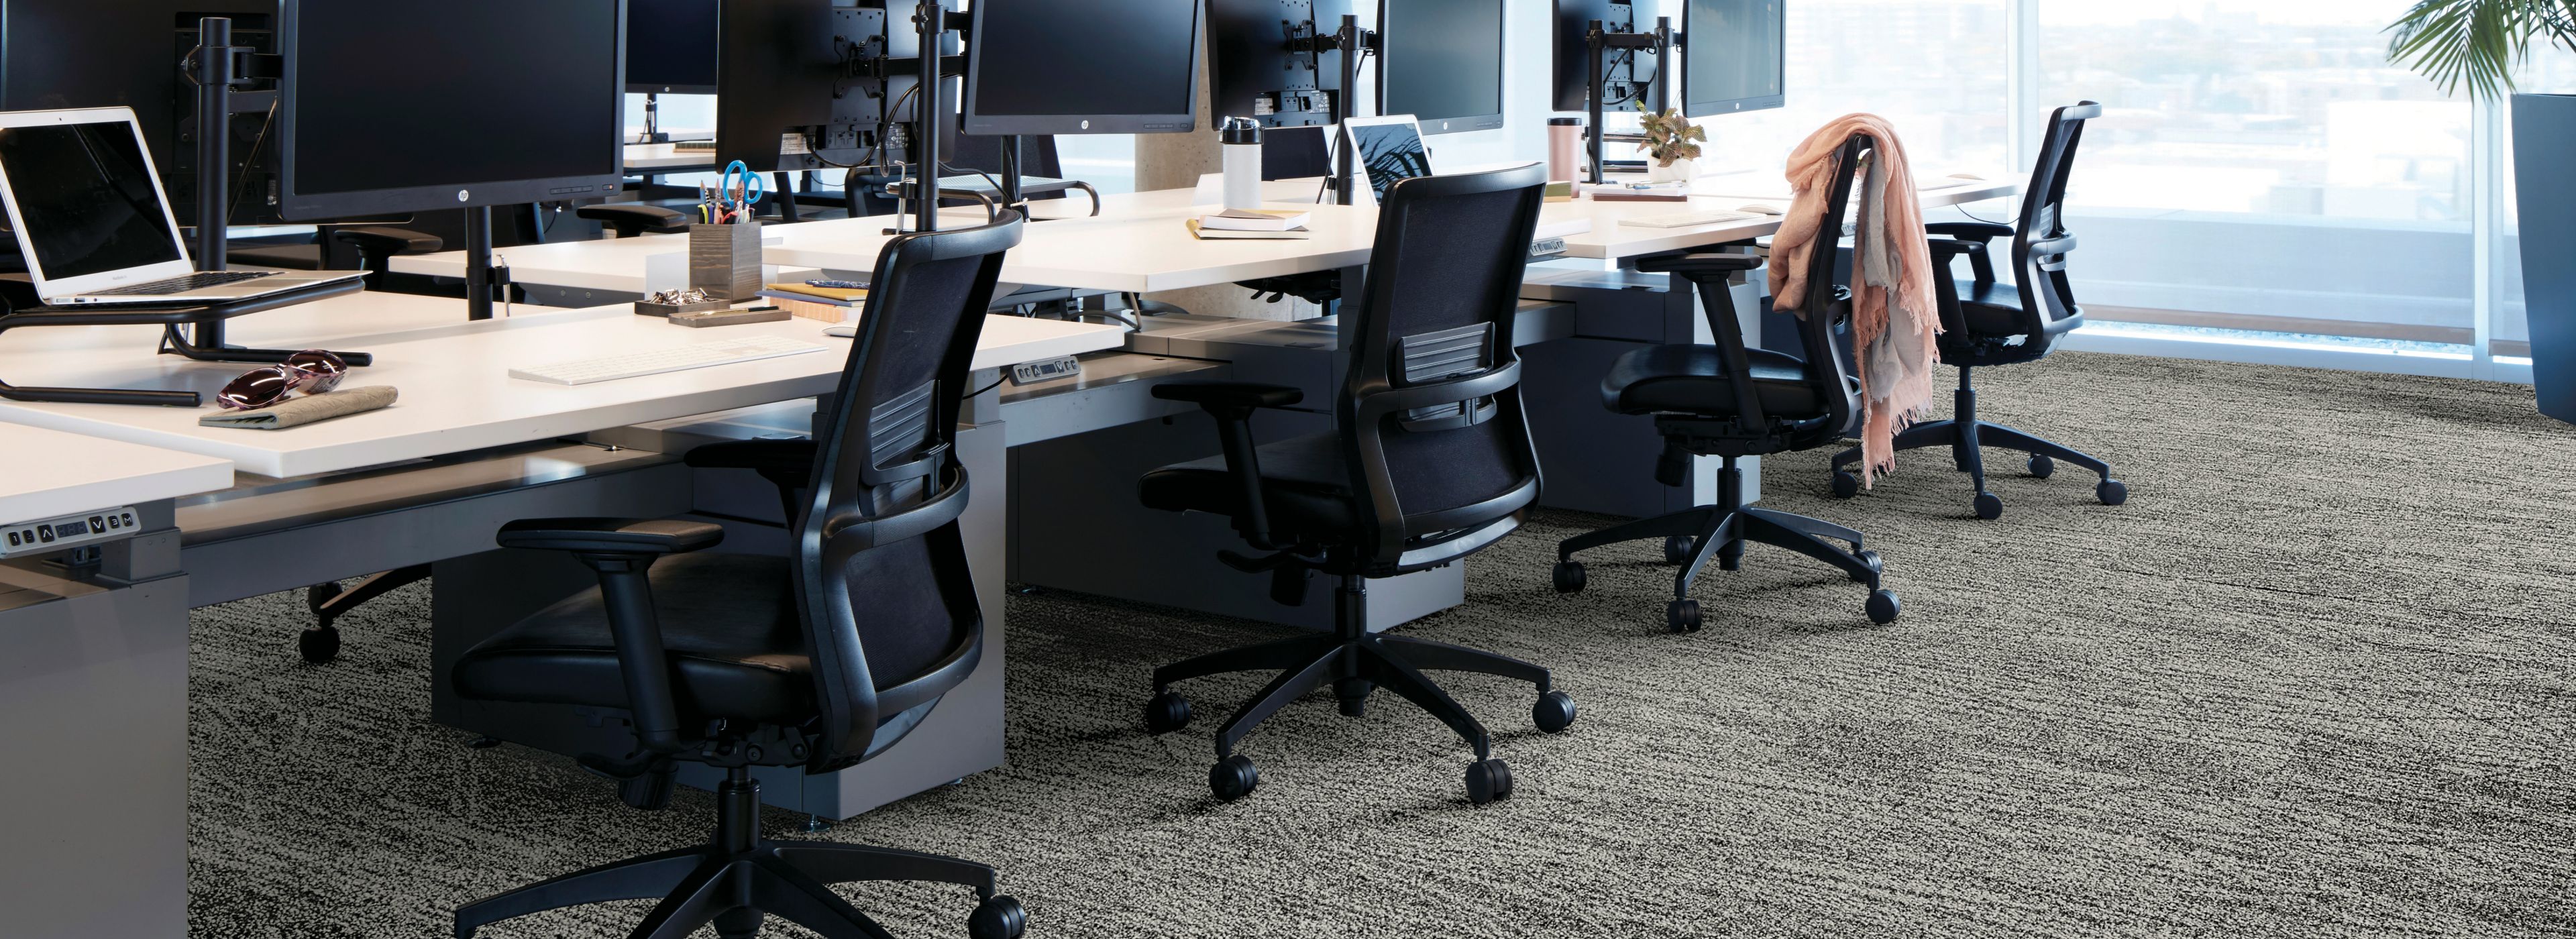 Interface Open Air 409 plank carpet tile with open work stations and cardigan draped over office chair image number 1